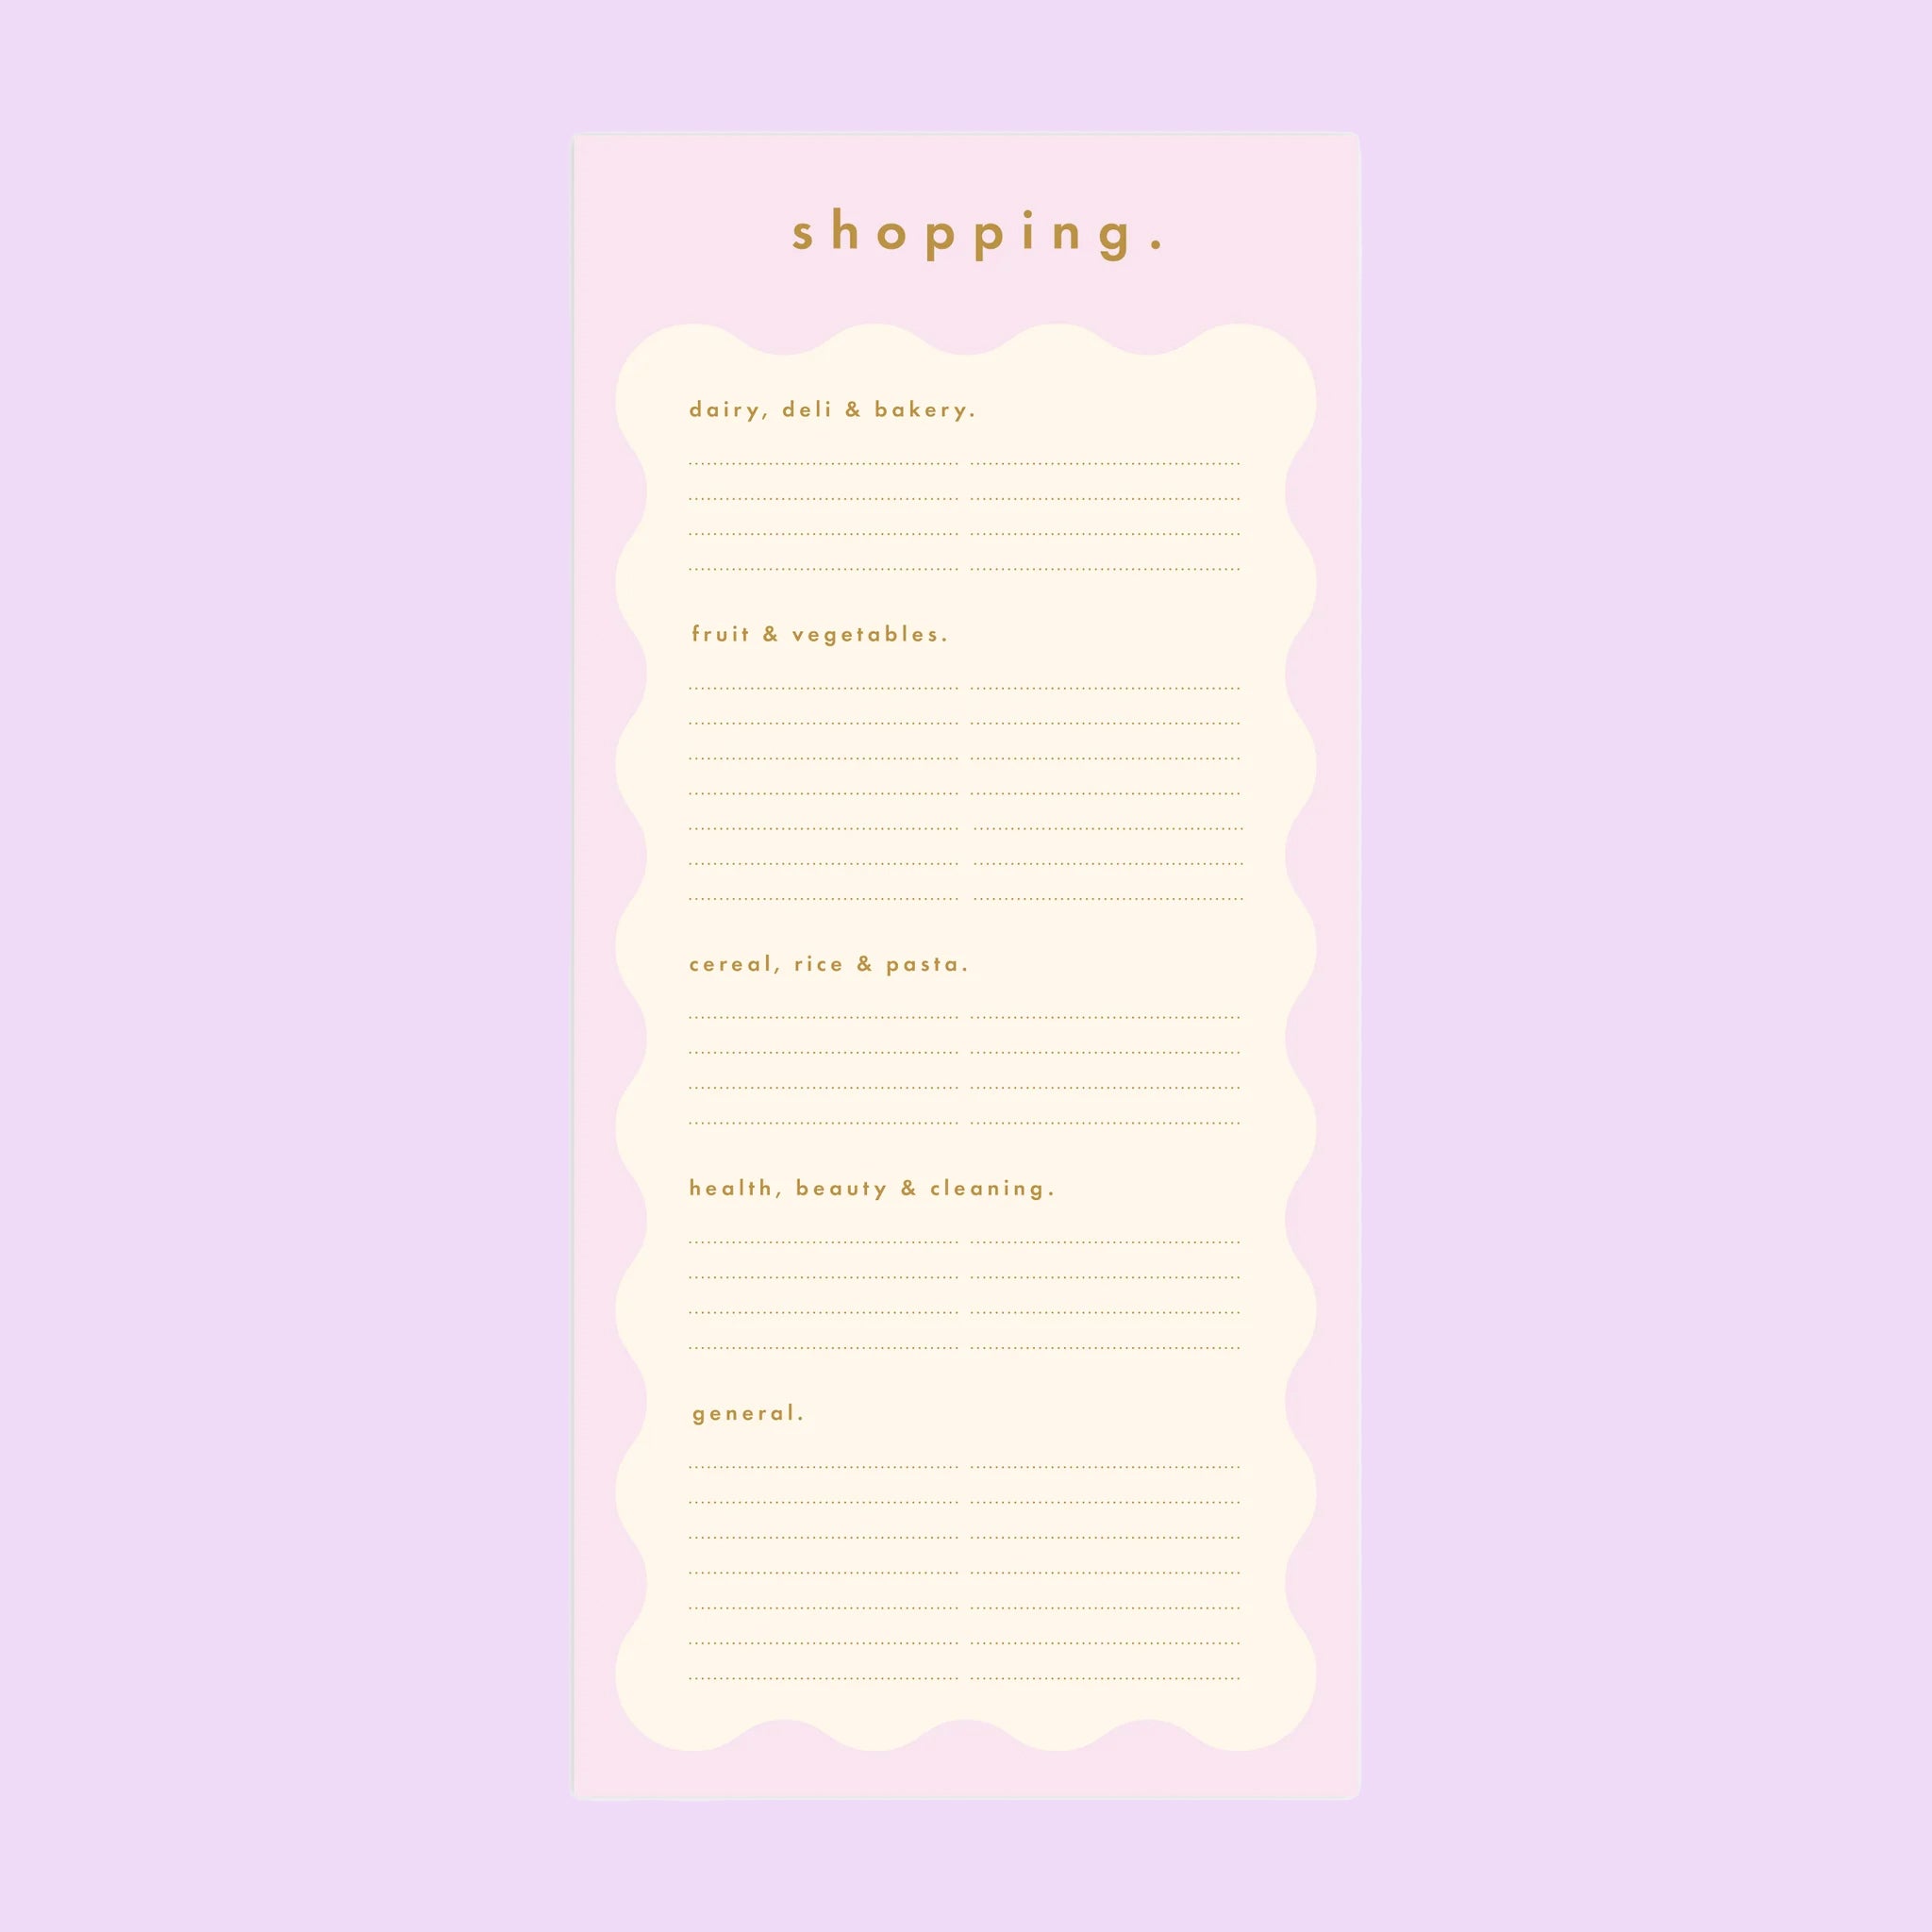 On a purple background is a lilac purple and ivory shopping notepad with a wavy design around the border and text that reads, "shopping.", "dairy, deli & bakery.", "fruit & vegtables.", "cereal, rice & pasta.", "health, beauty & cleaning" and "general.". 